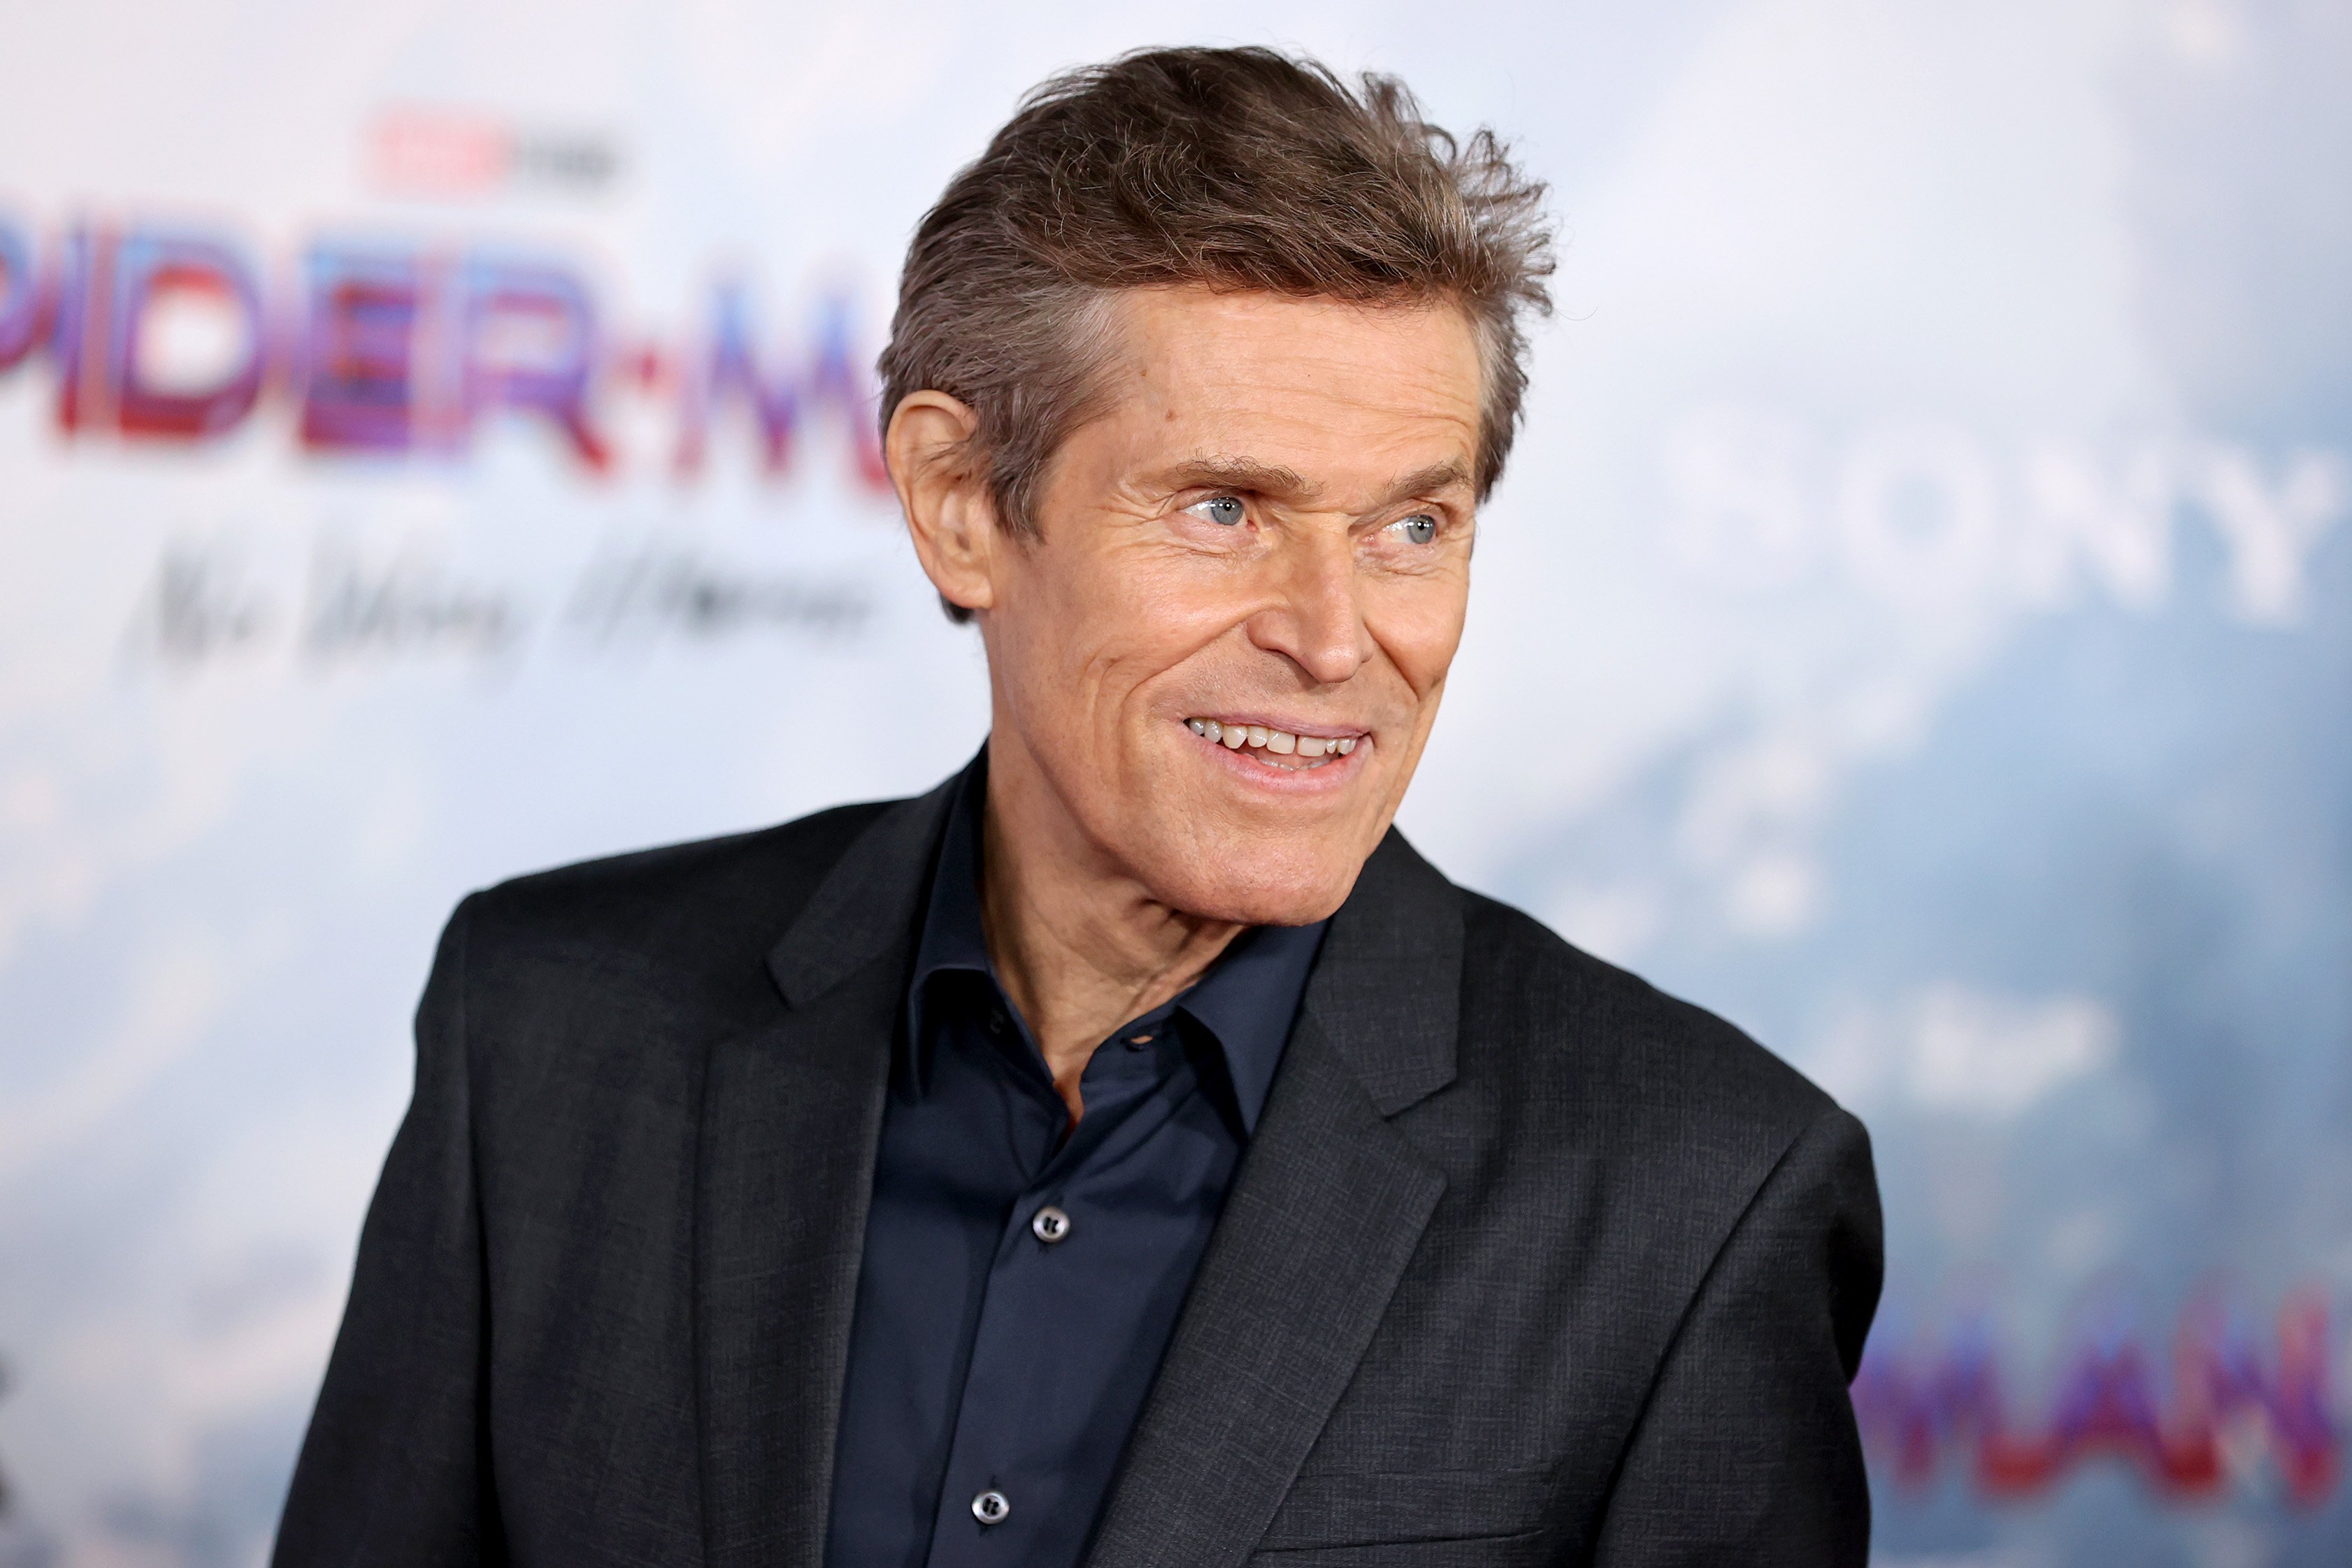 Green Goblin actor Willem Dafoe at the premiere for 'Spider-Man: No Way Home.' He's wearing a black suit and smiling at something to the side of the camera.